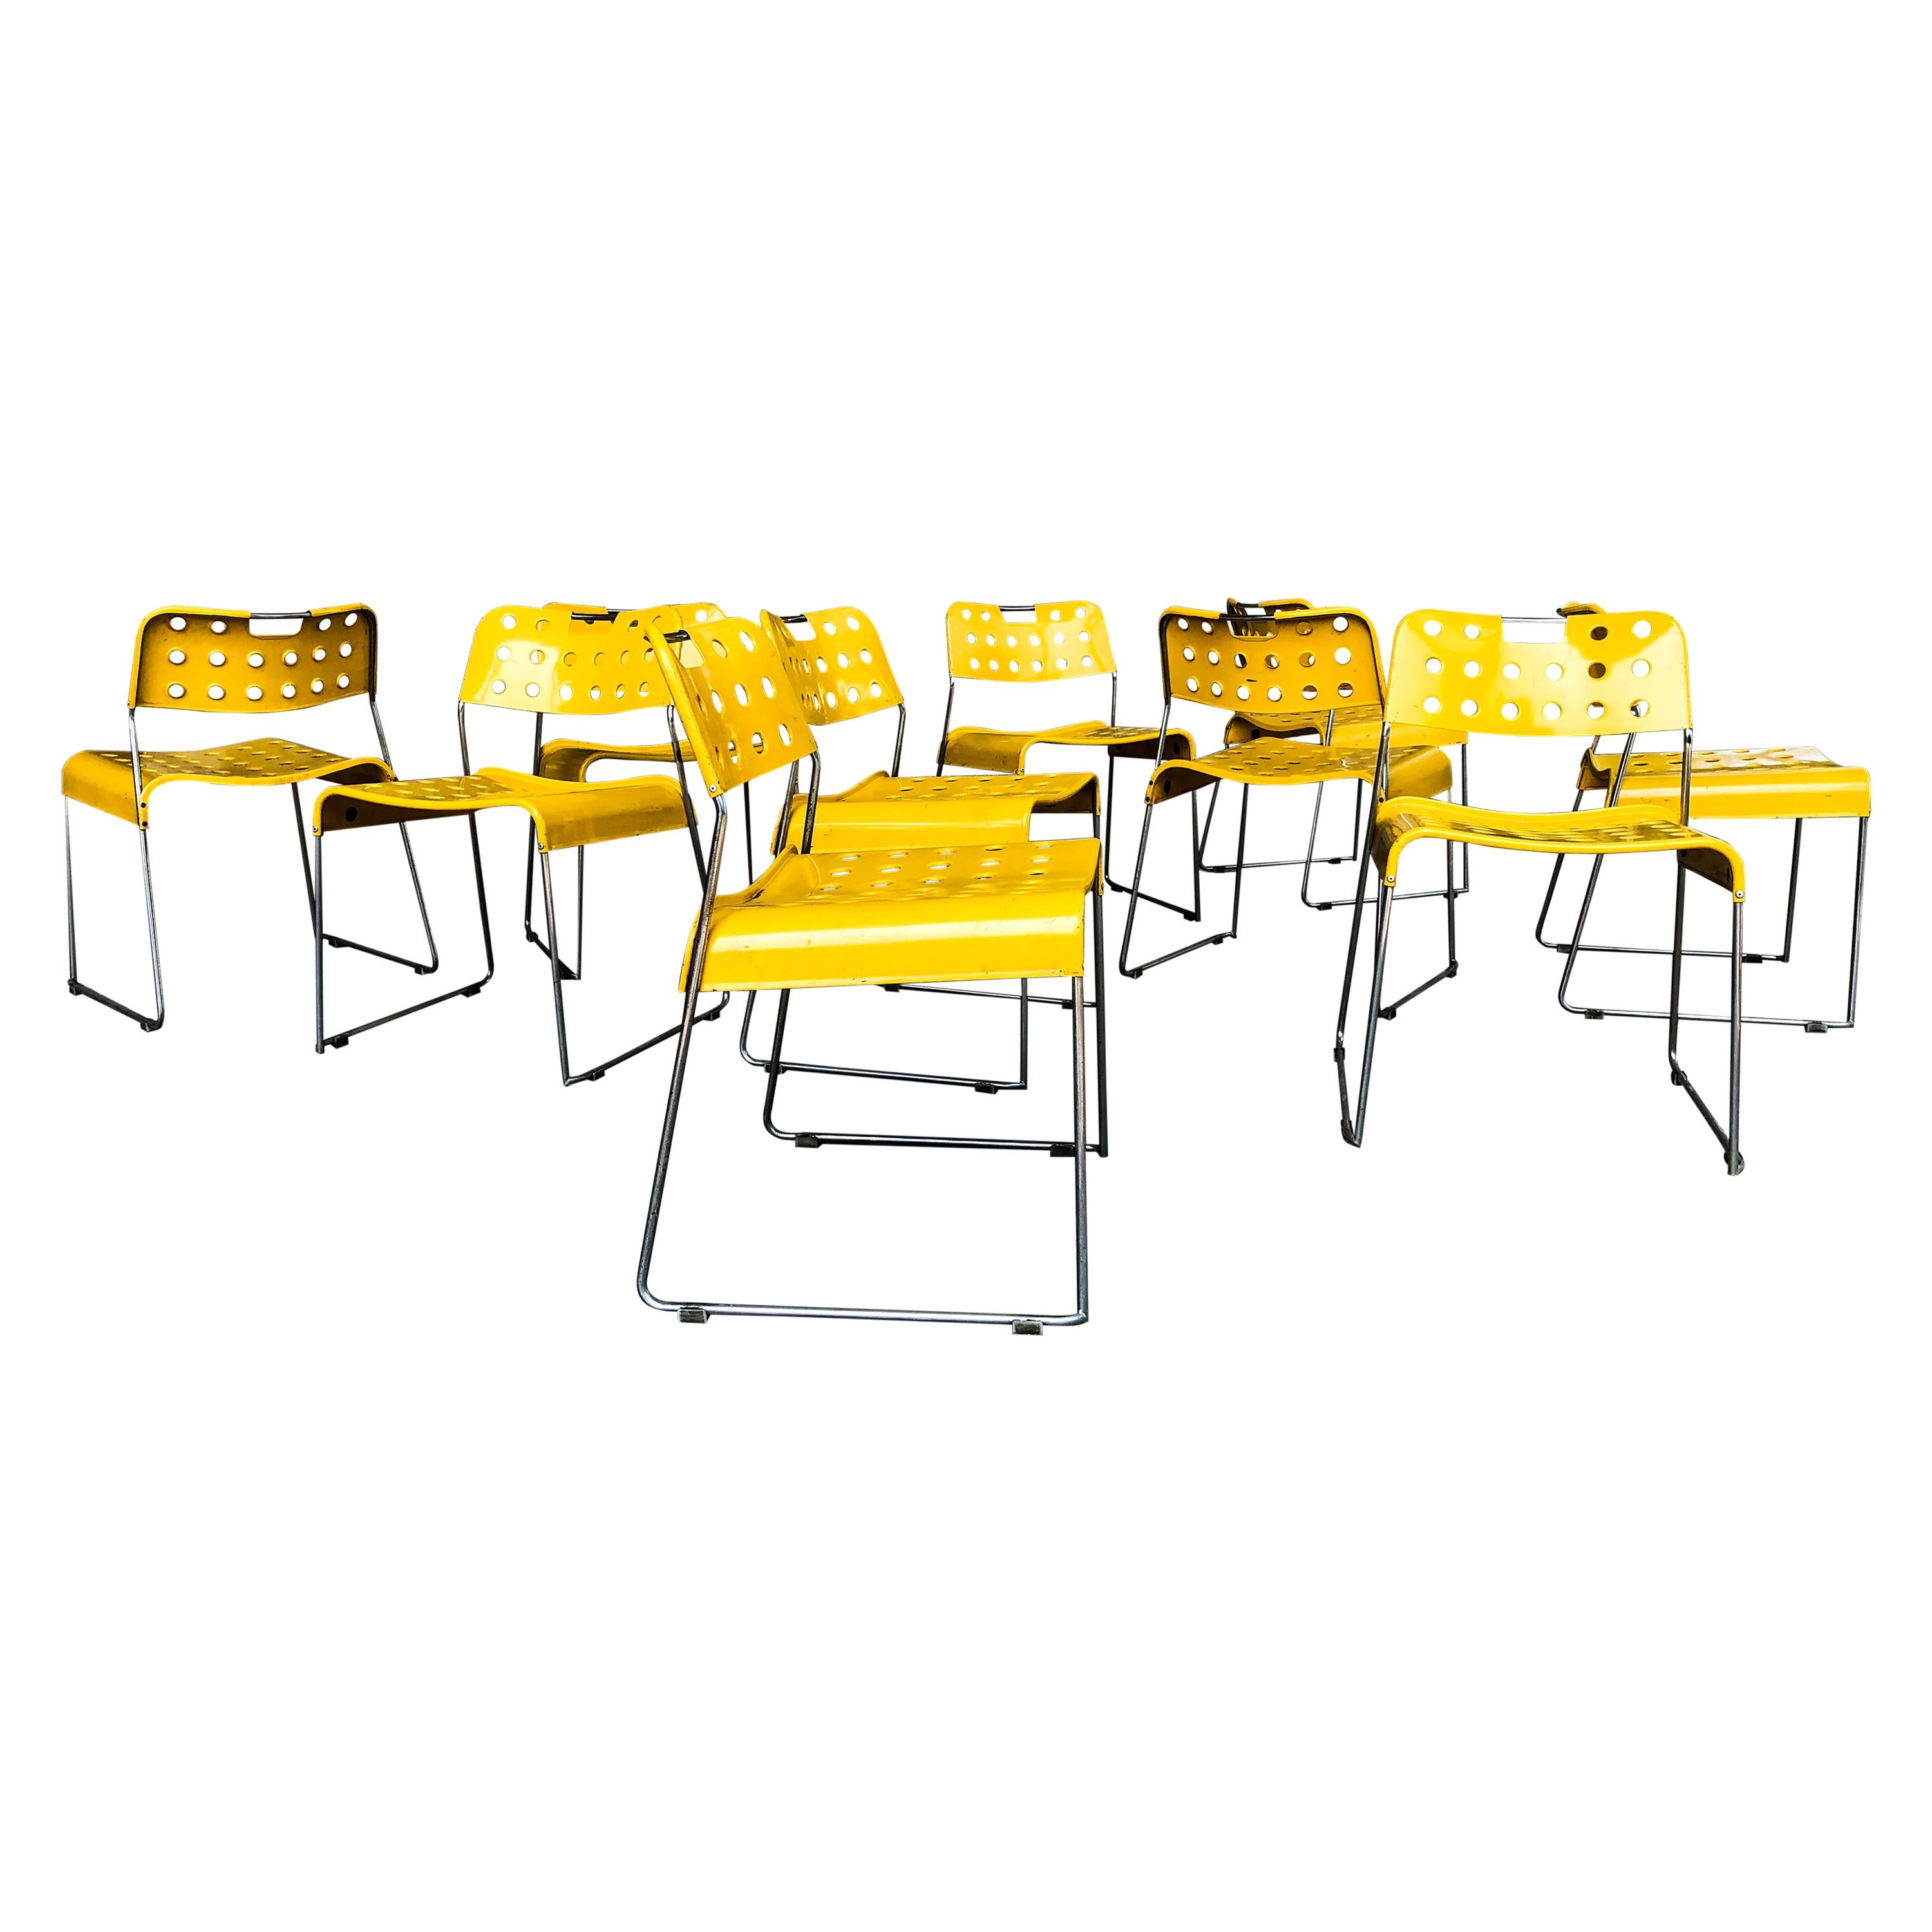 Late 20th Century Rodney Kinsman Space Age Yellow Omstak Chair for Bieffeplast, 1971, Set 0f 18 For Sale